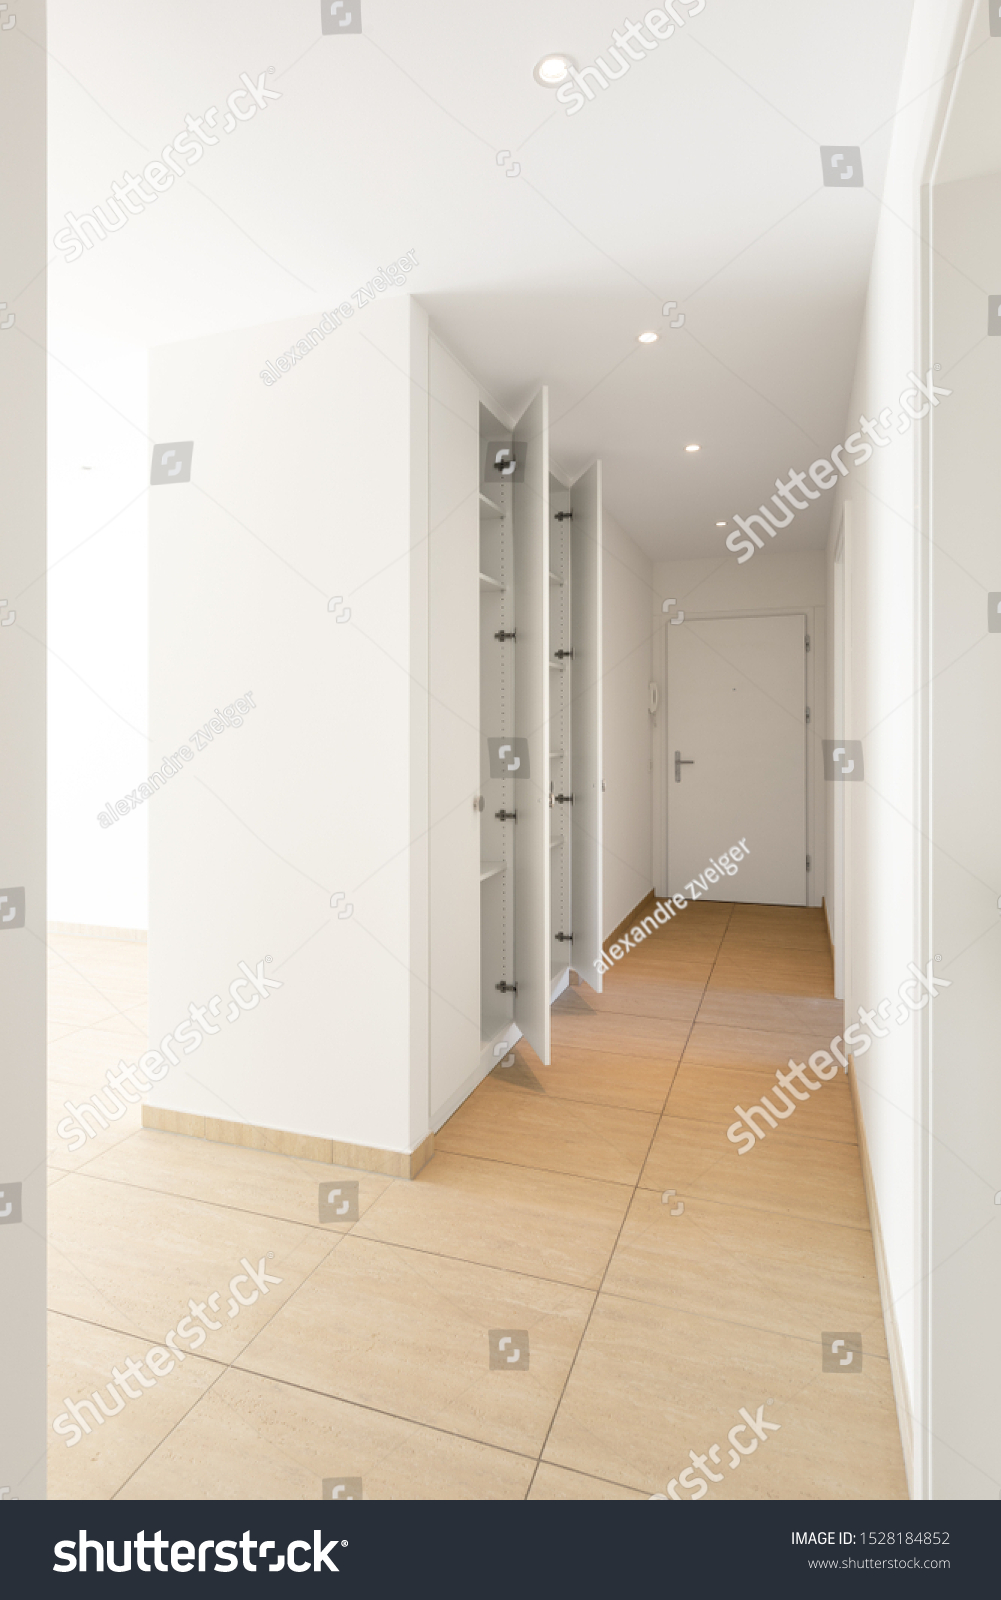 Corridor with travertine floor, white walls and built-in wardrobes. Nobody inside #1528184852